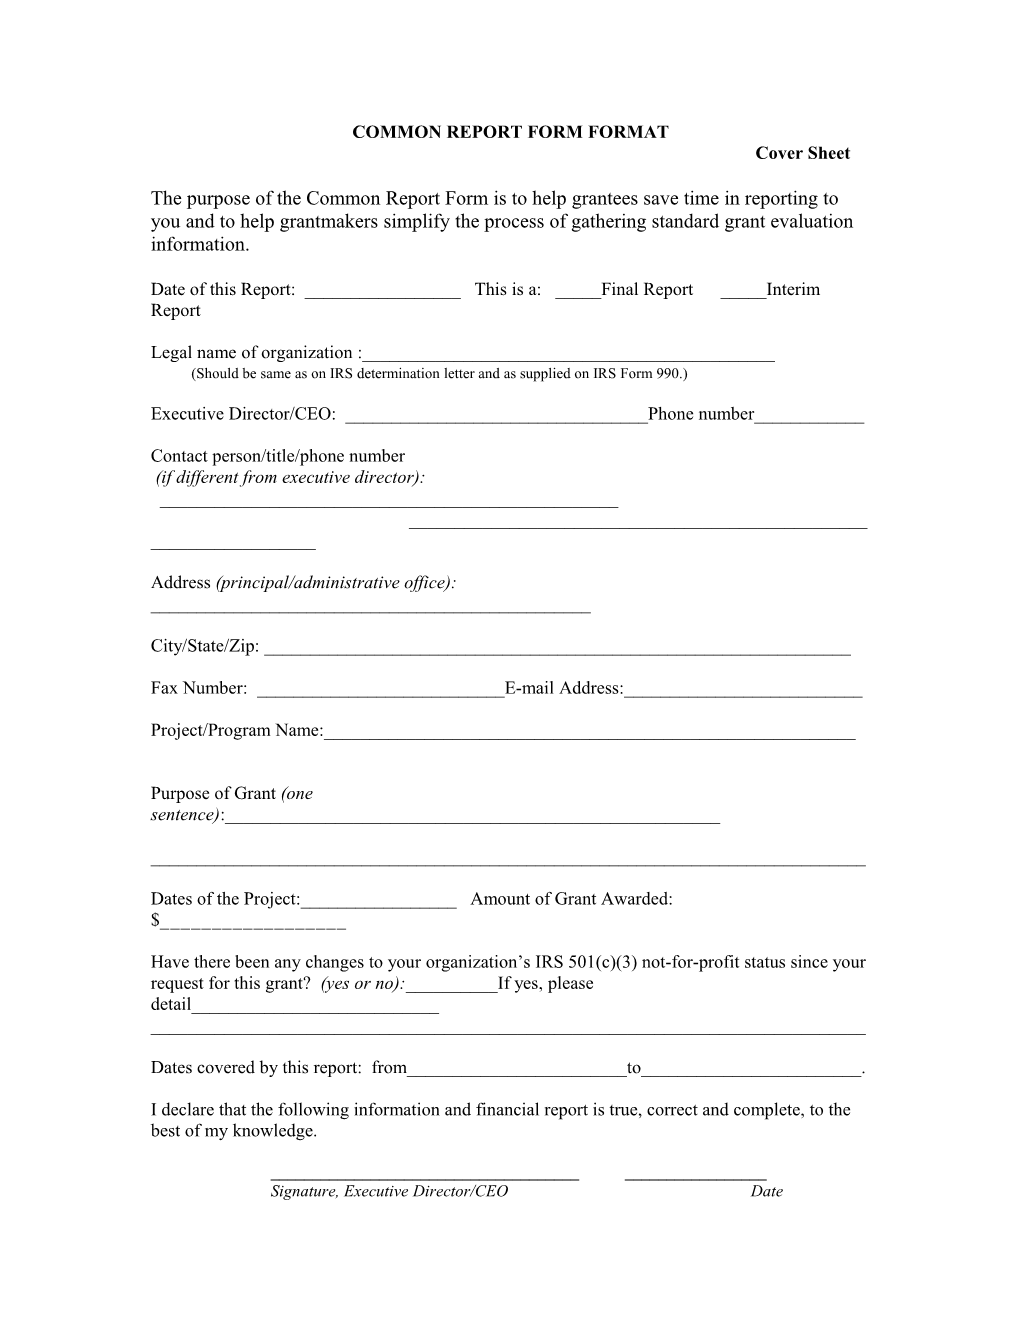 Common Report Form Format